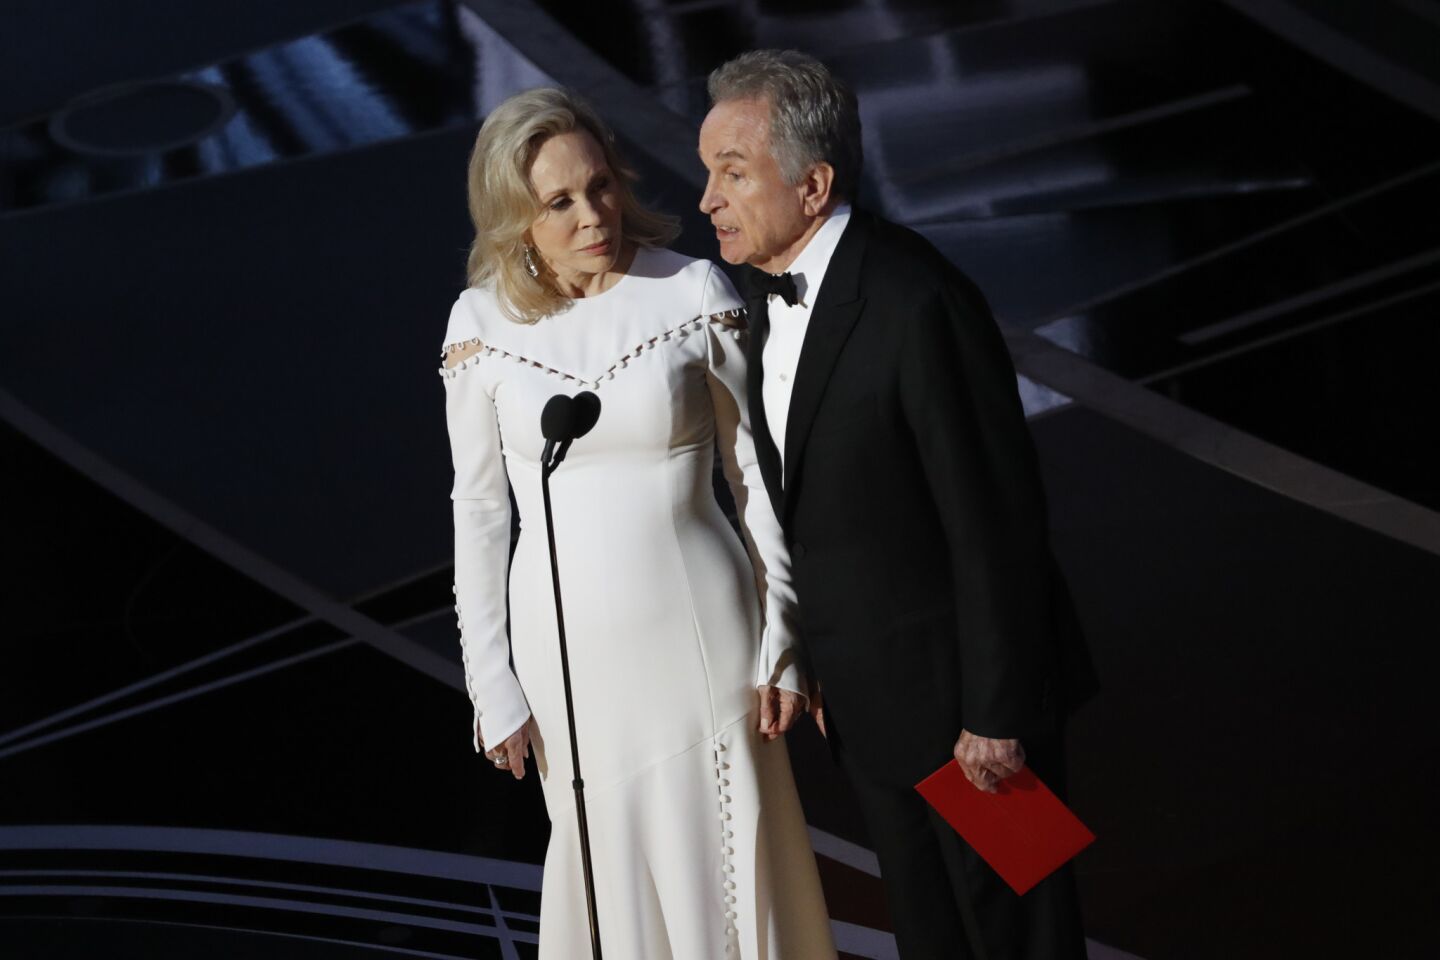 Presenters Faye Dunaway and Warren Beatty are onstage and about to read the Oscar winner for best picture.